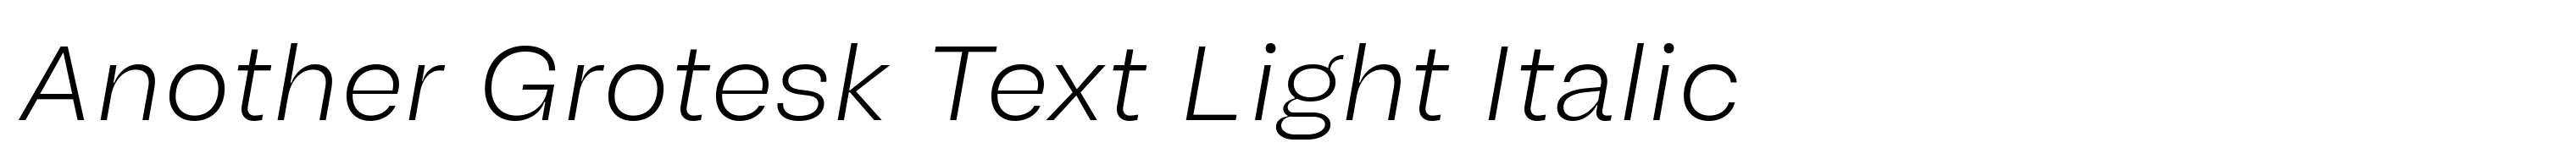 Another Grotesk Text Light Italic